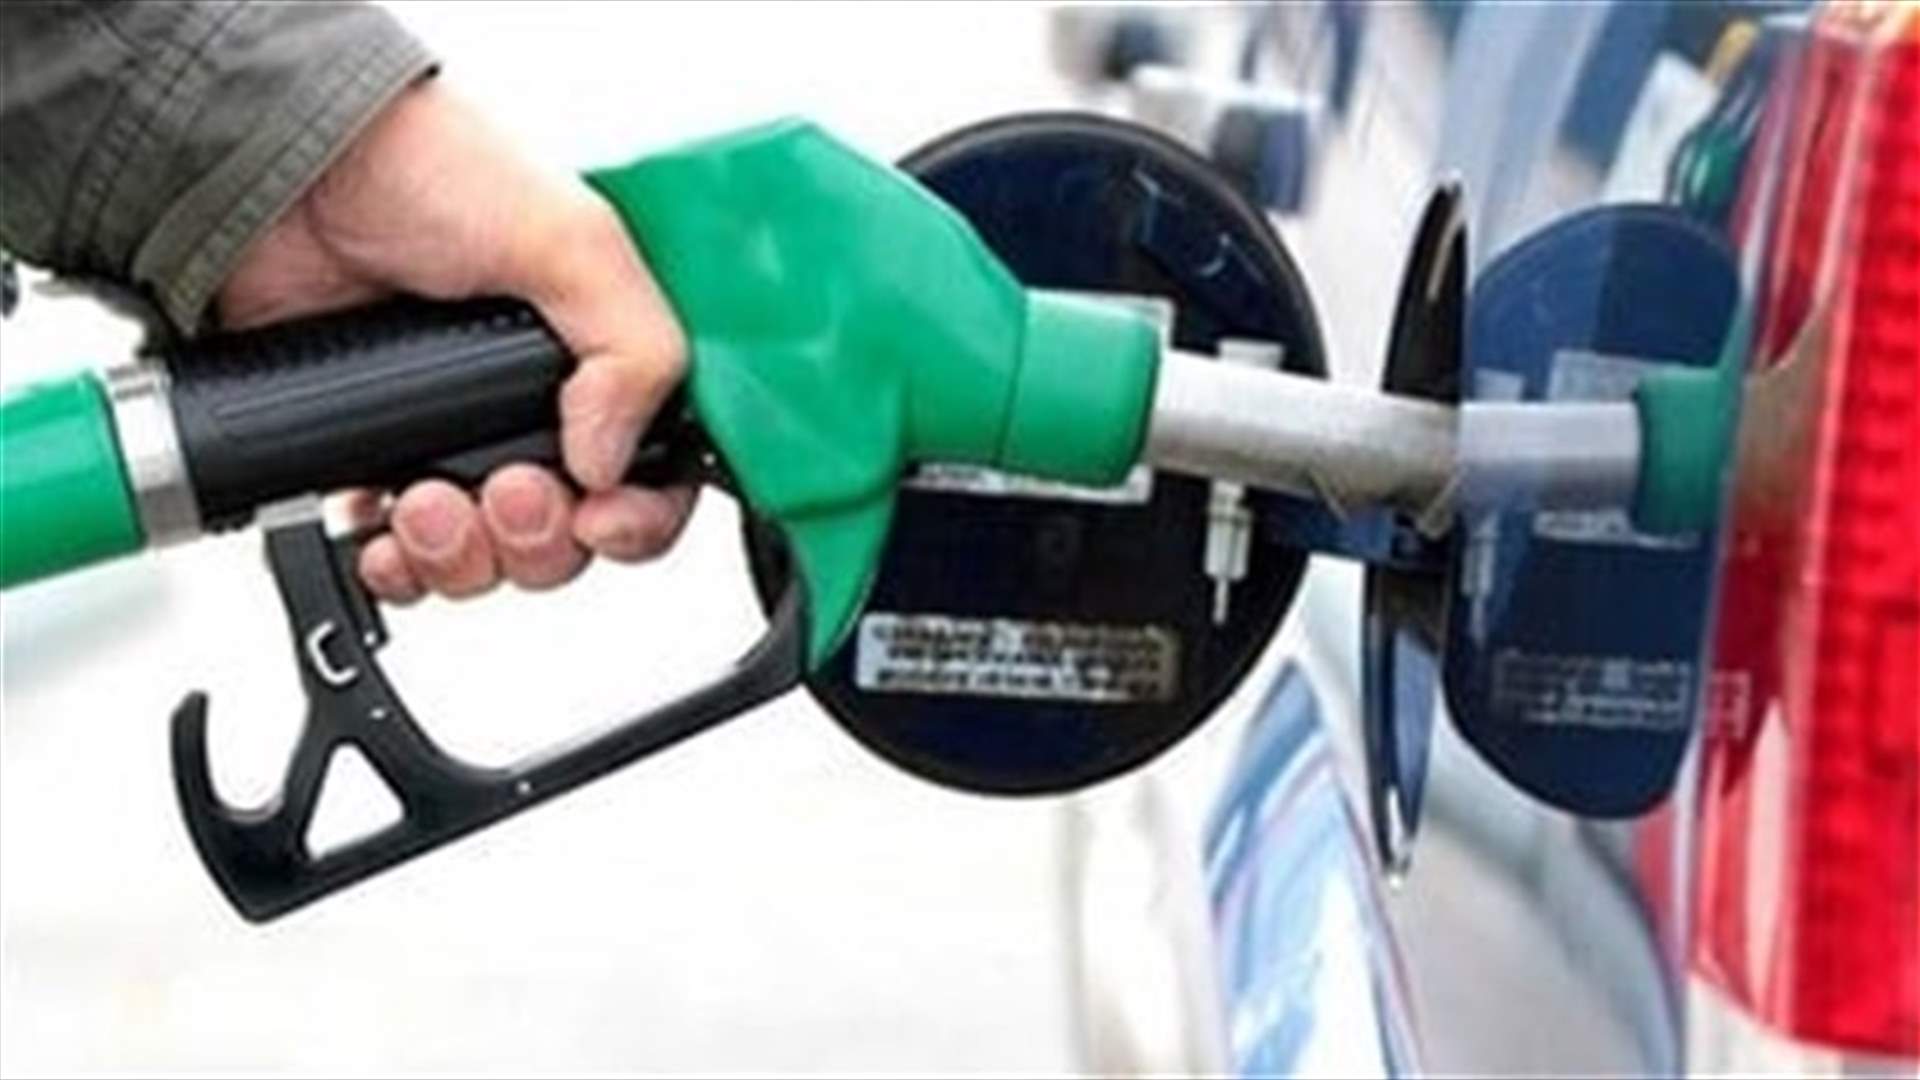 Price of gasoline sees further increase